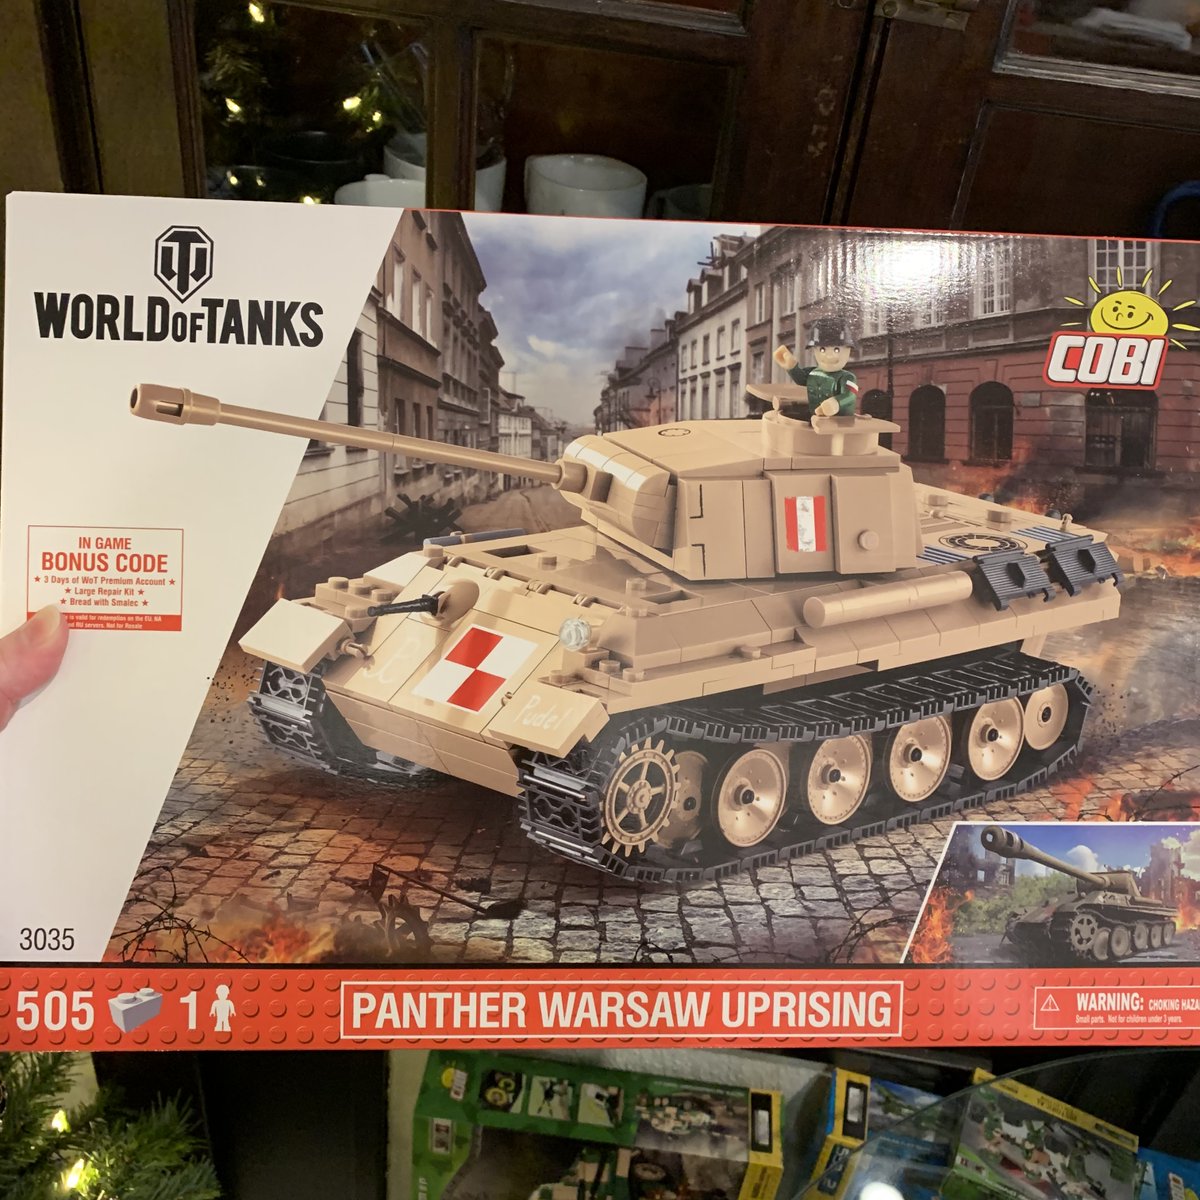 We still have a “Warsaw Uprising” Panther, a Tiger II, and a C-47 to assemble. Ok that last one isn’t a tank but Airborne will always have a special place in my heart.